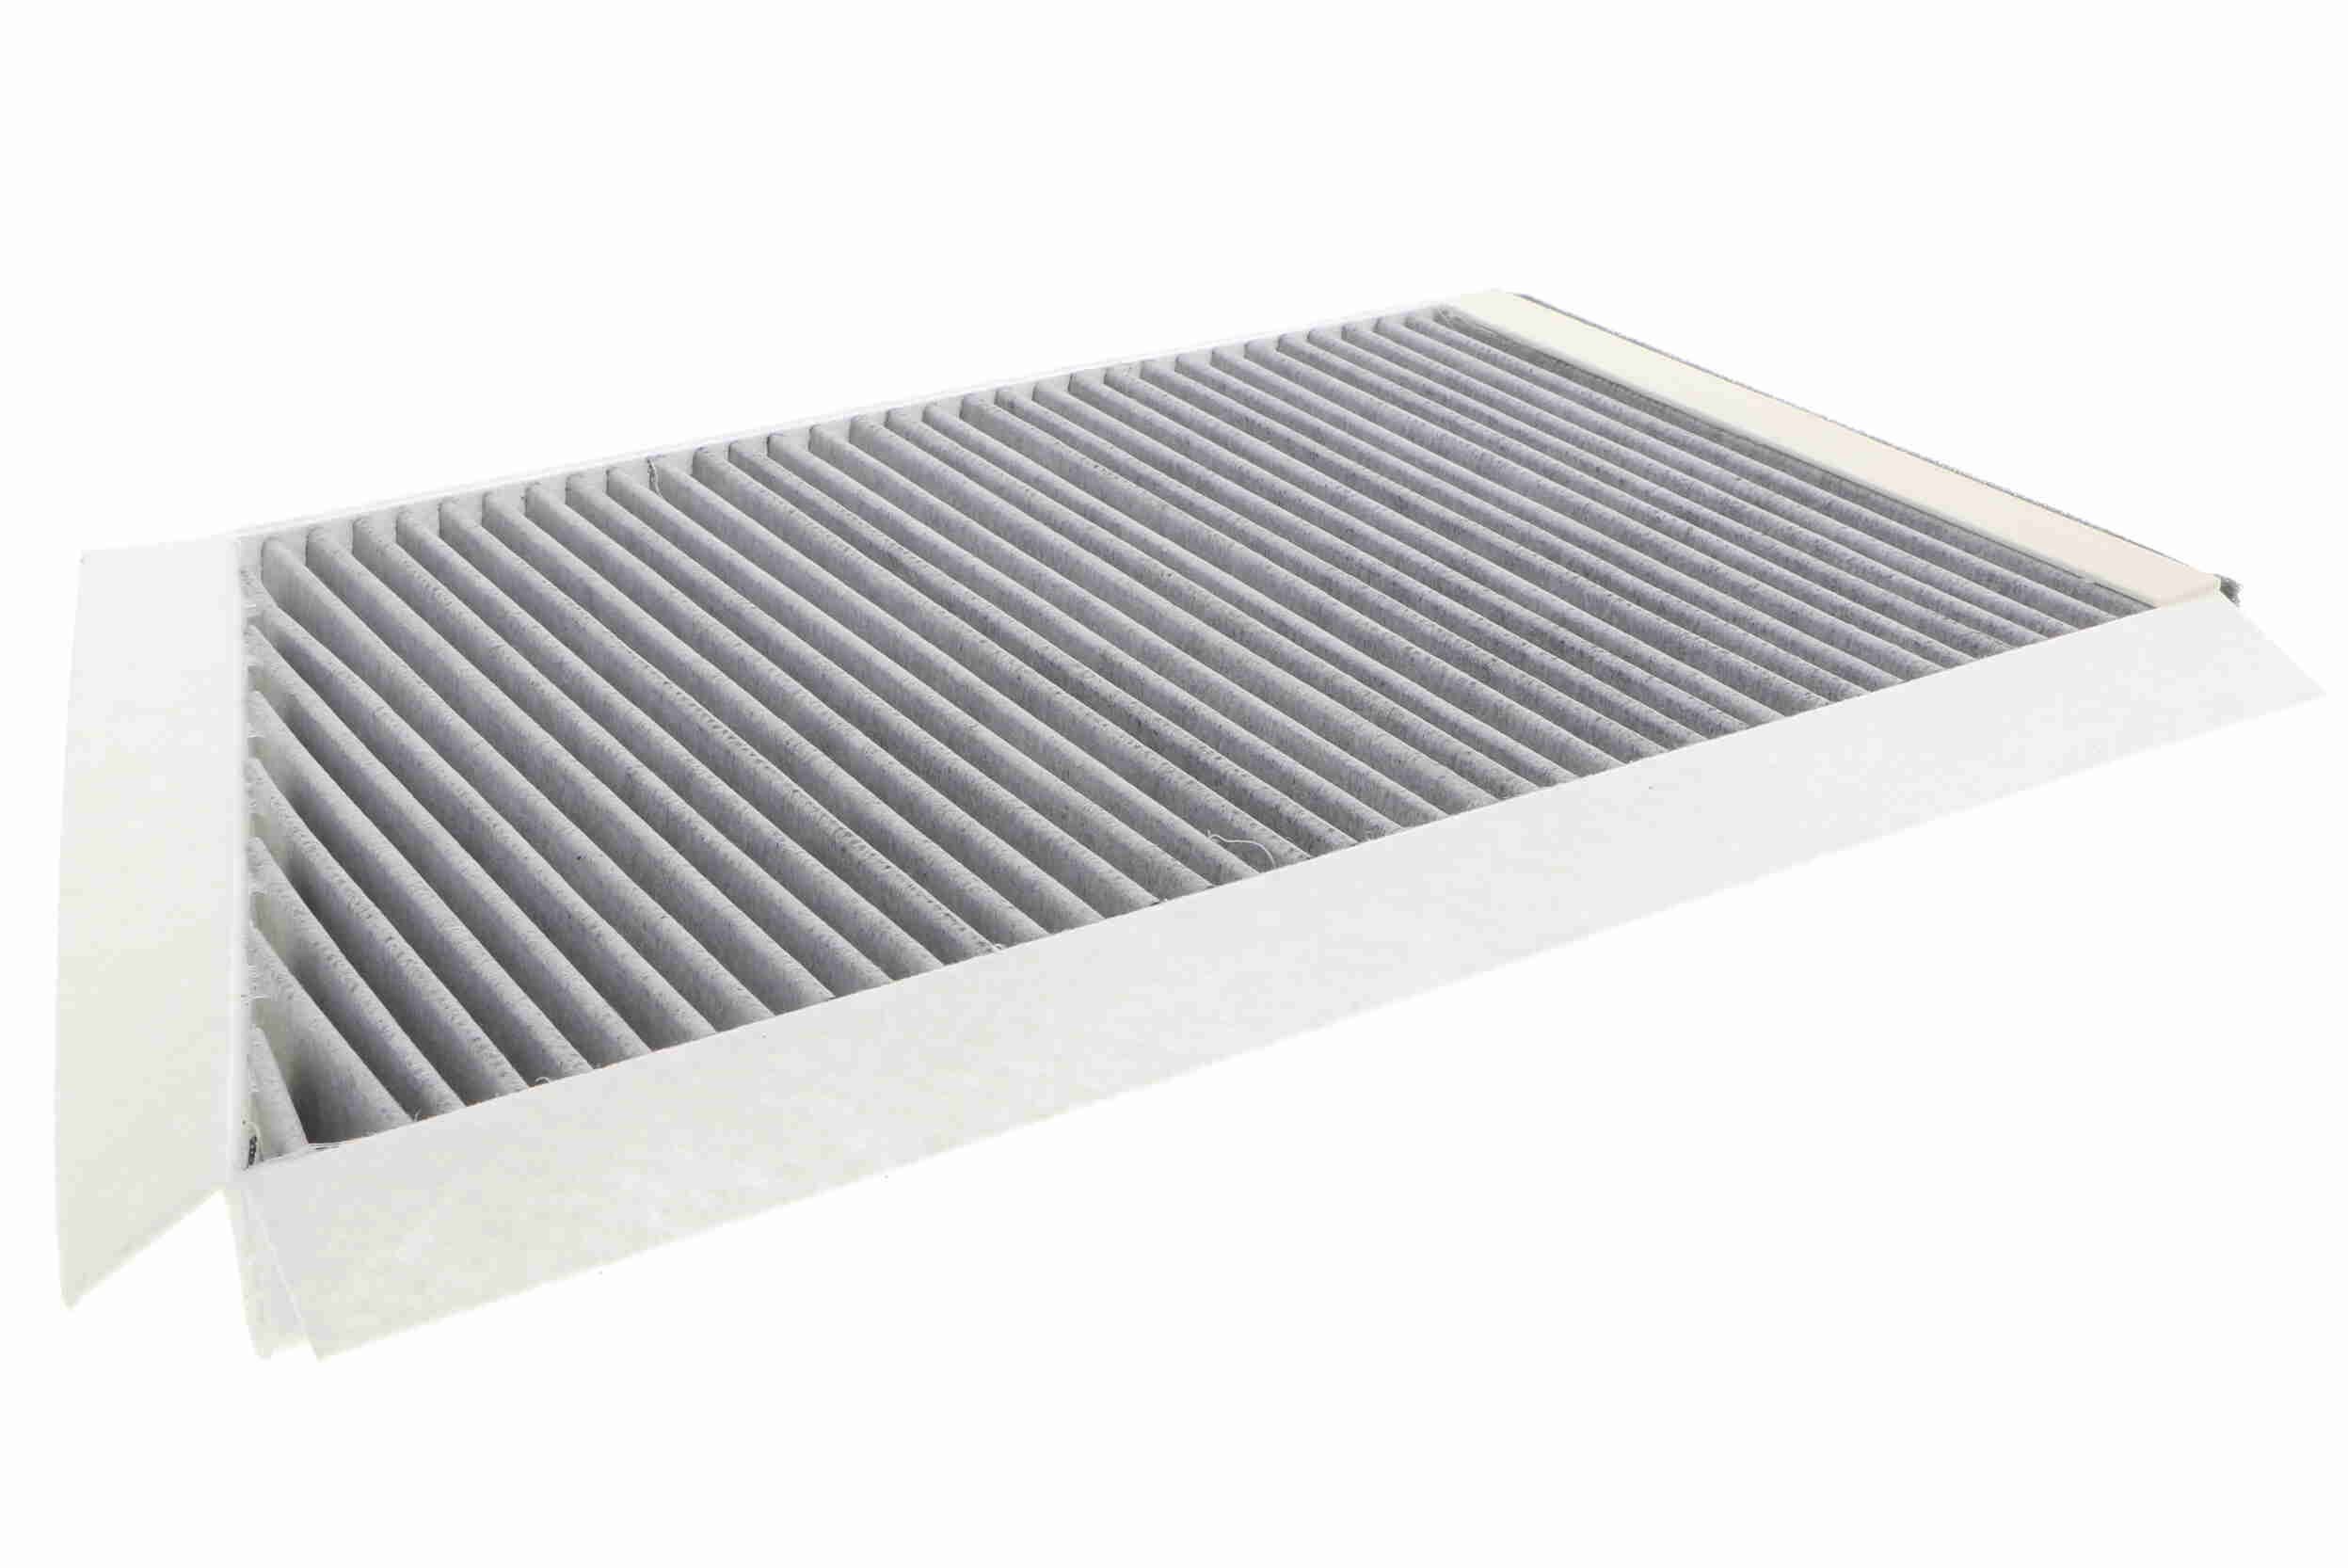 VEMO Air conditioning filter V30-31-1005 suitable for MERCEDES-BENZ C-Class, CLK, CLC